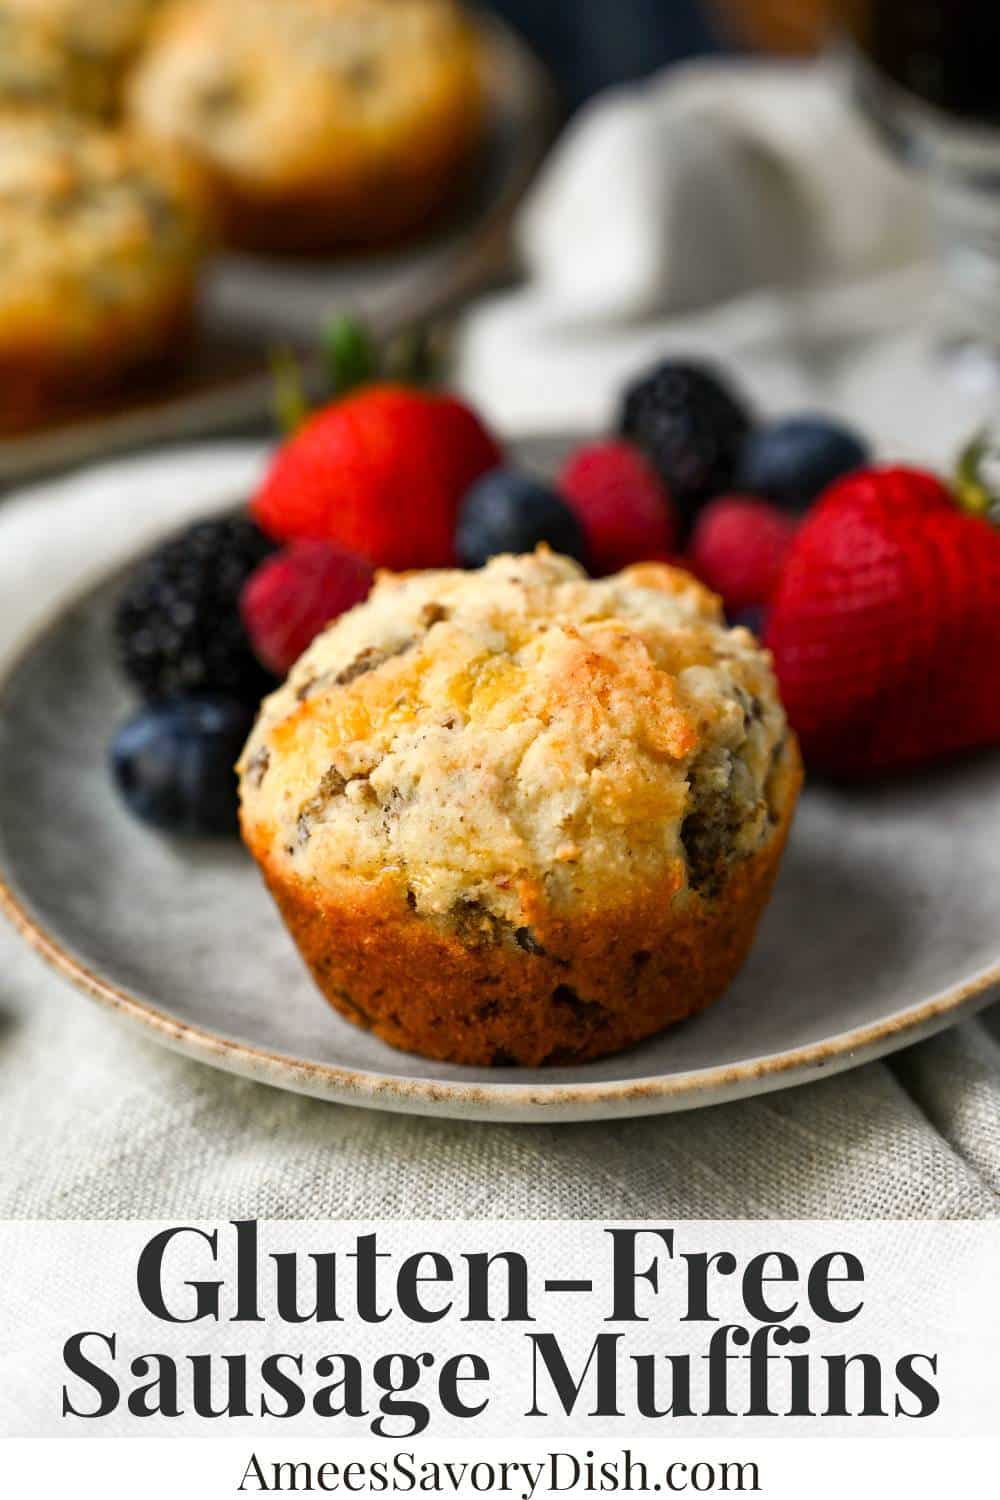 This easy Gluten-Free Sausage Muffins recipe calls for only 5 ingredients to make irresistibly fluffy and flavorful muffins. Perfect for a simple savory breakfast or a satisfying snack! via @Ameessavorydish